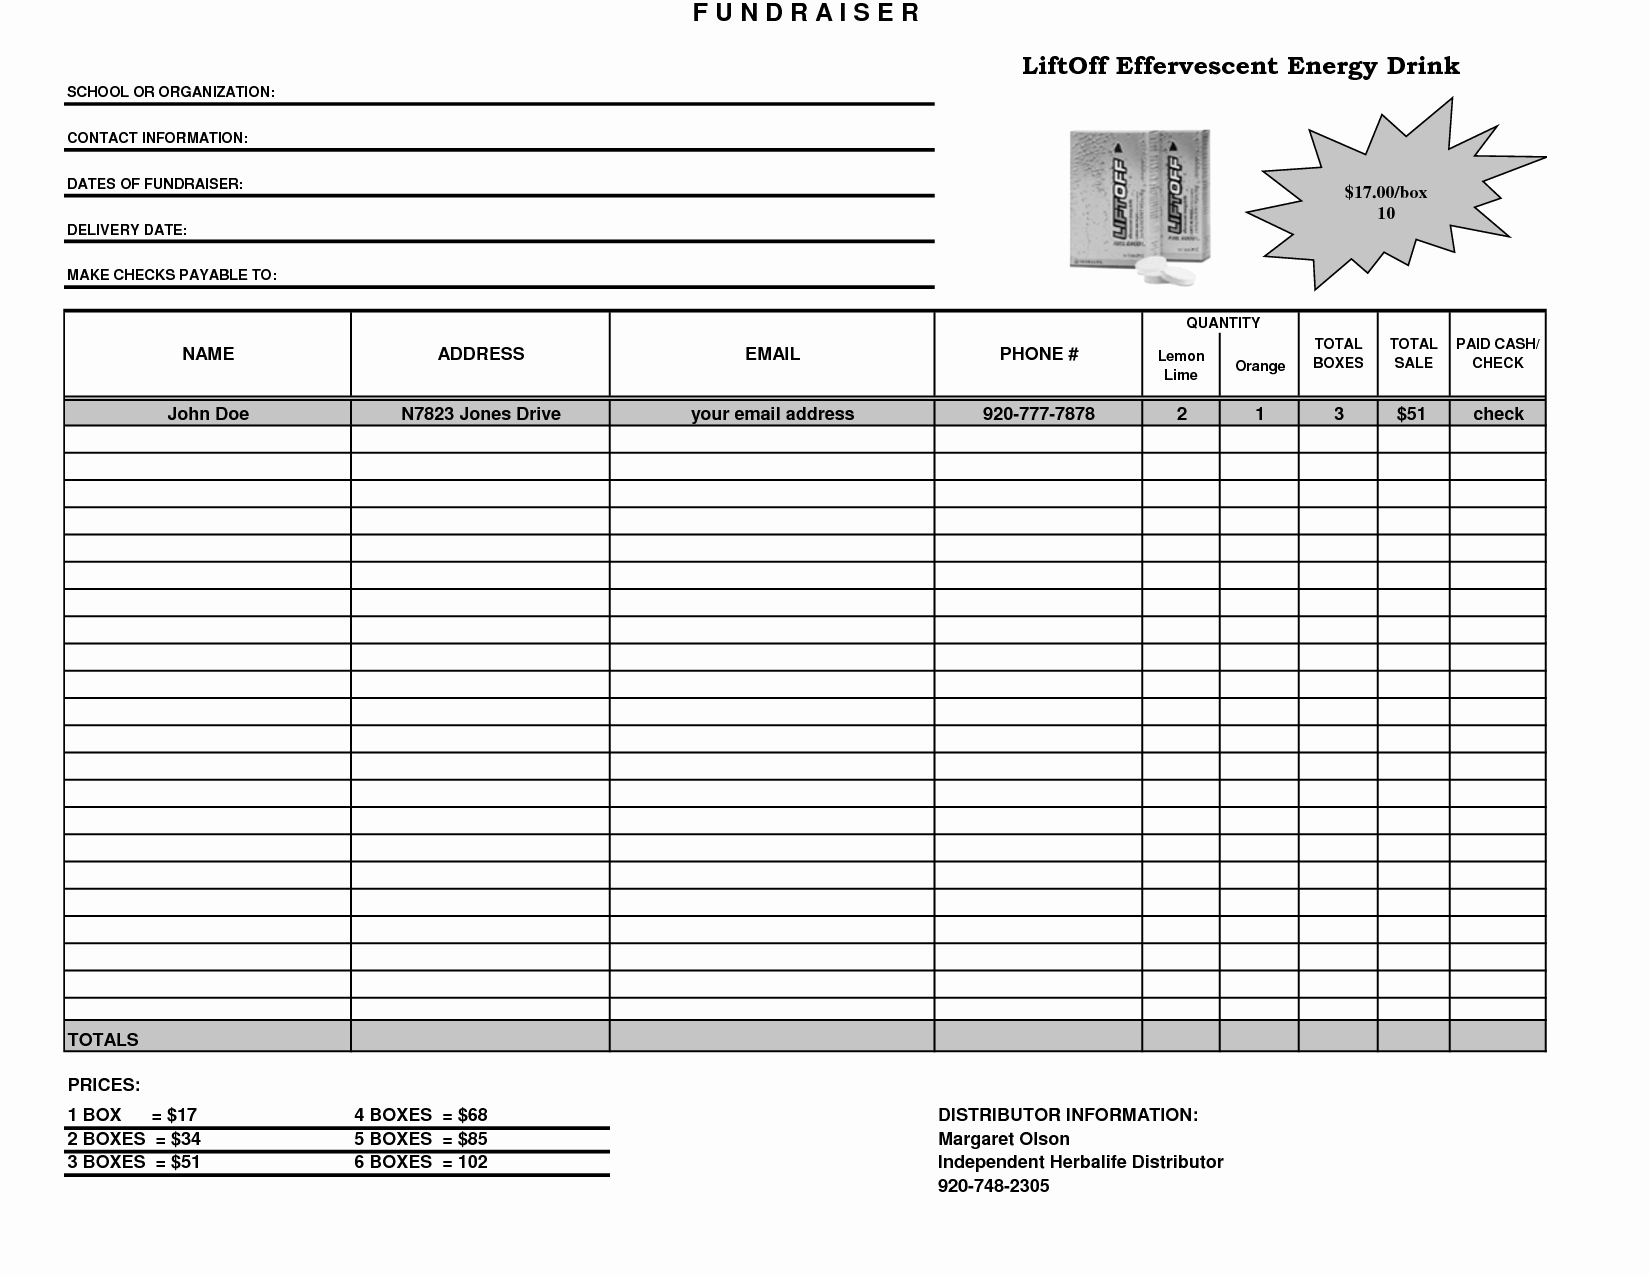 Fundraiser order form Template Free Fresh Fundraiser Template Excel Fundraiser order form Template